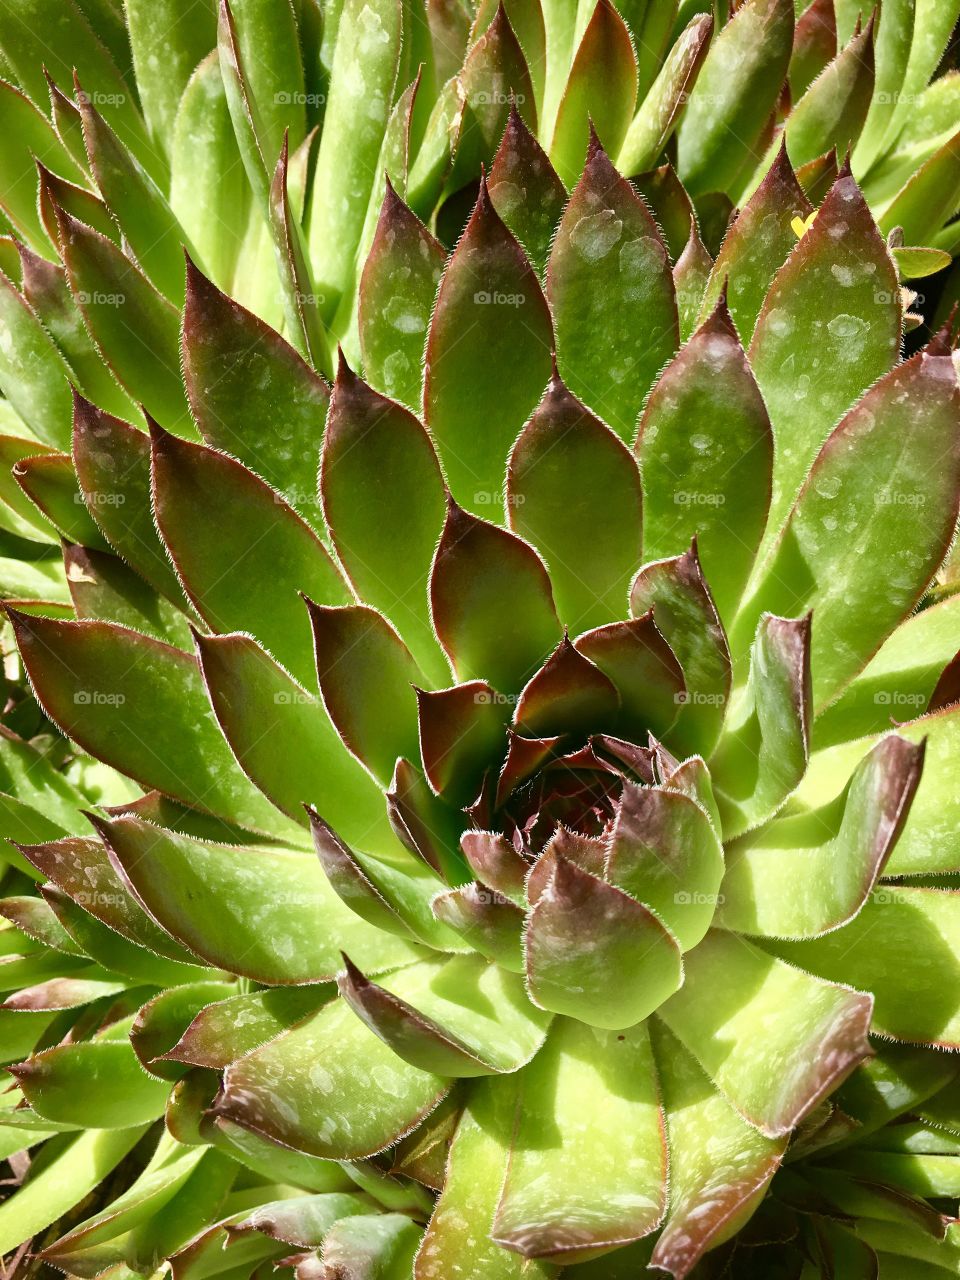 Green succulent. Cactus. Green and maroon. Beautiful tips. Nature. Row. Green.